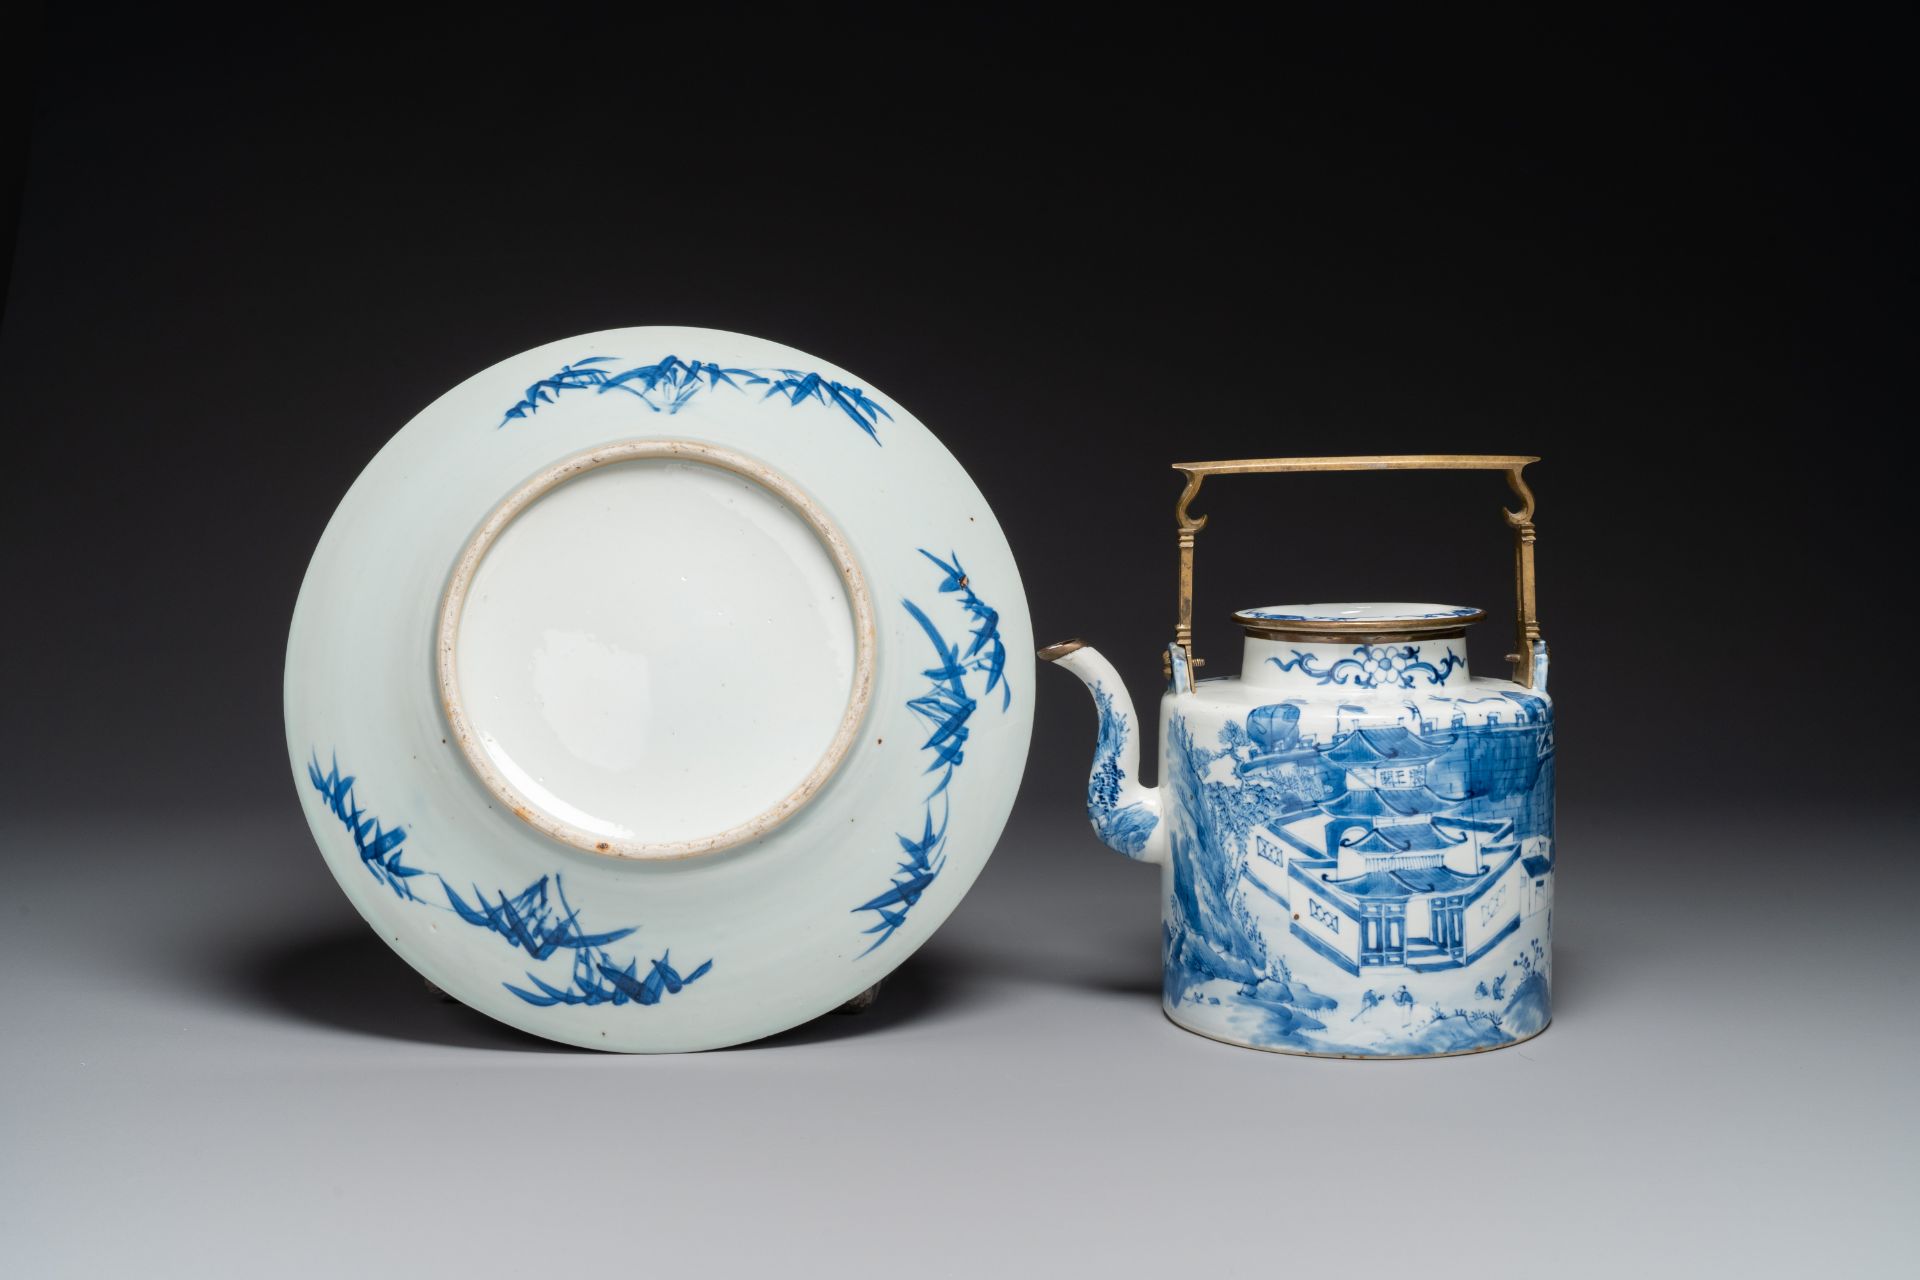 A Chinese blue and white teapot with landscape design and an 'antiquities' dish, 19th C. - Image 2 of 4